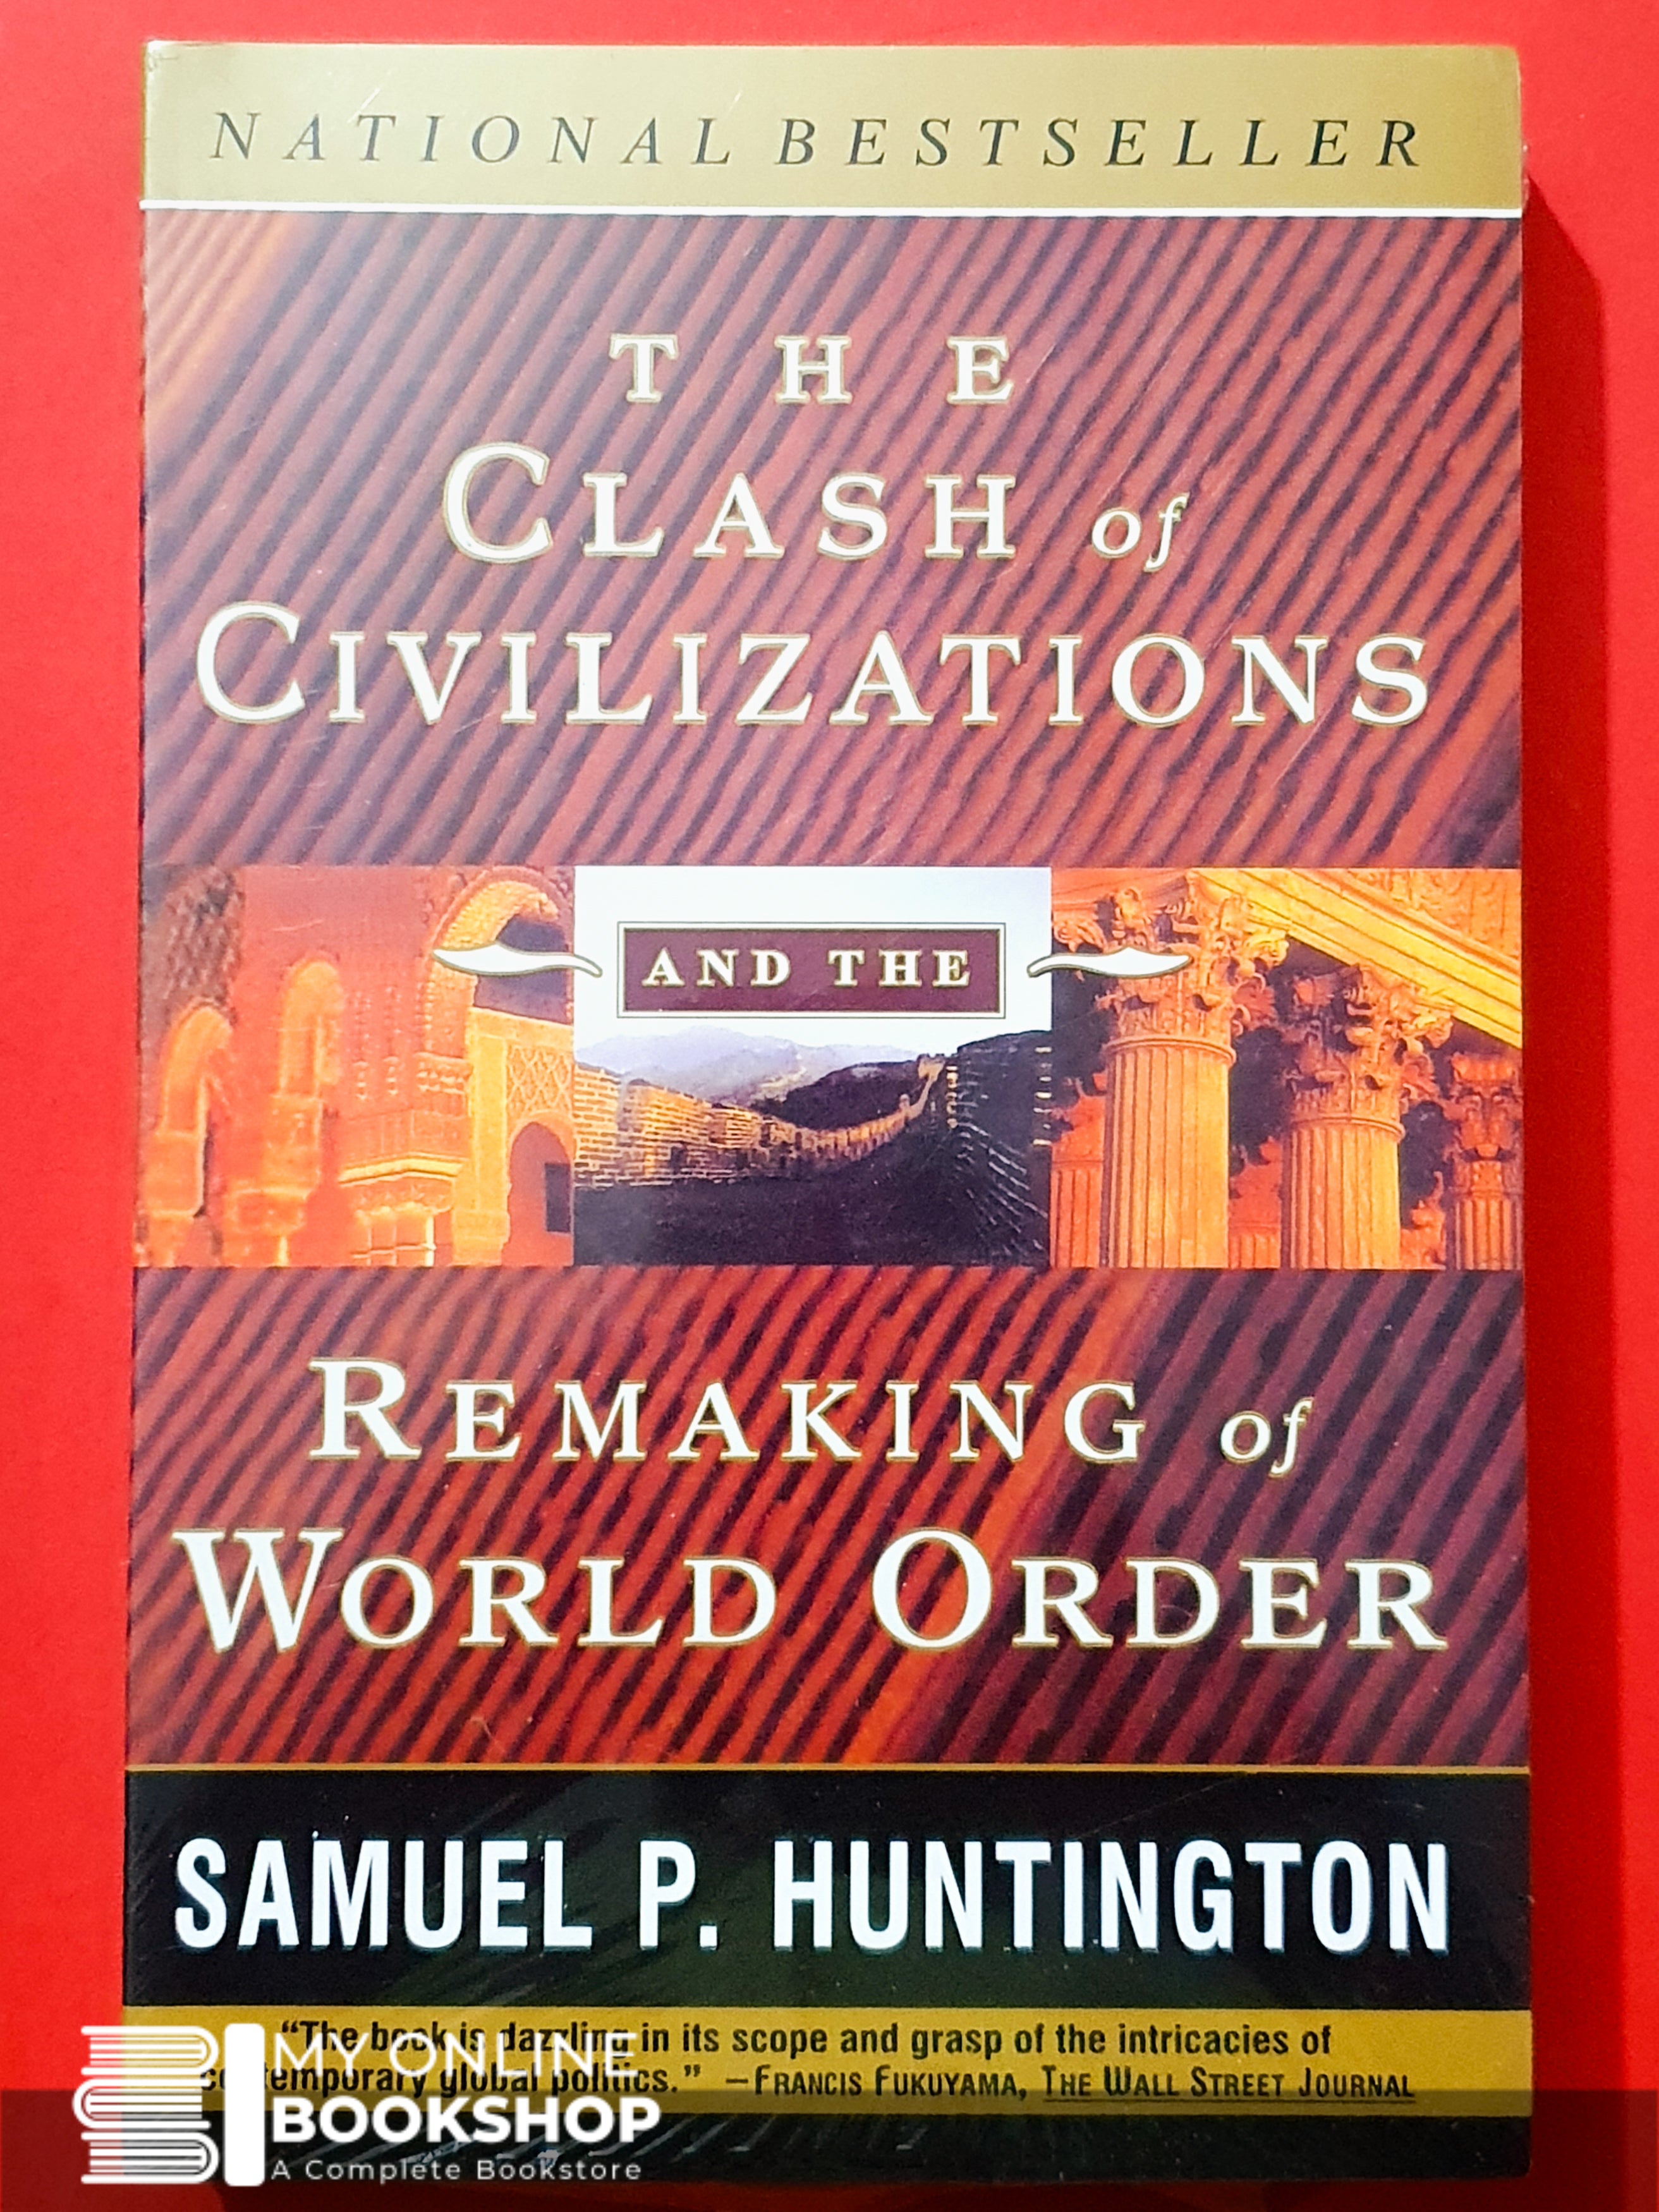 Remaking　Clash　the　Civilizations　World　Online　Order　Bookshop　–　My　The　and　of　of